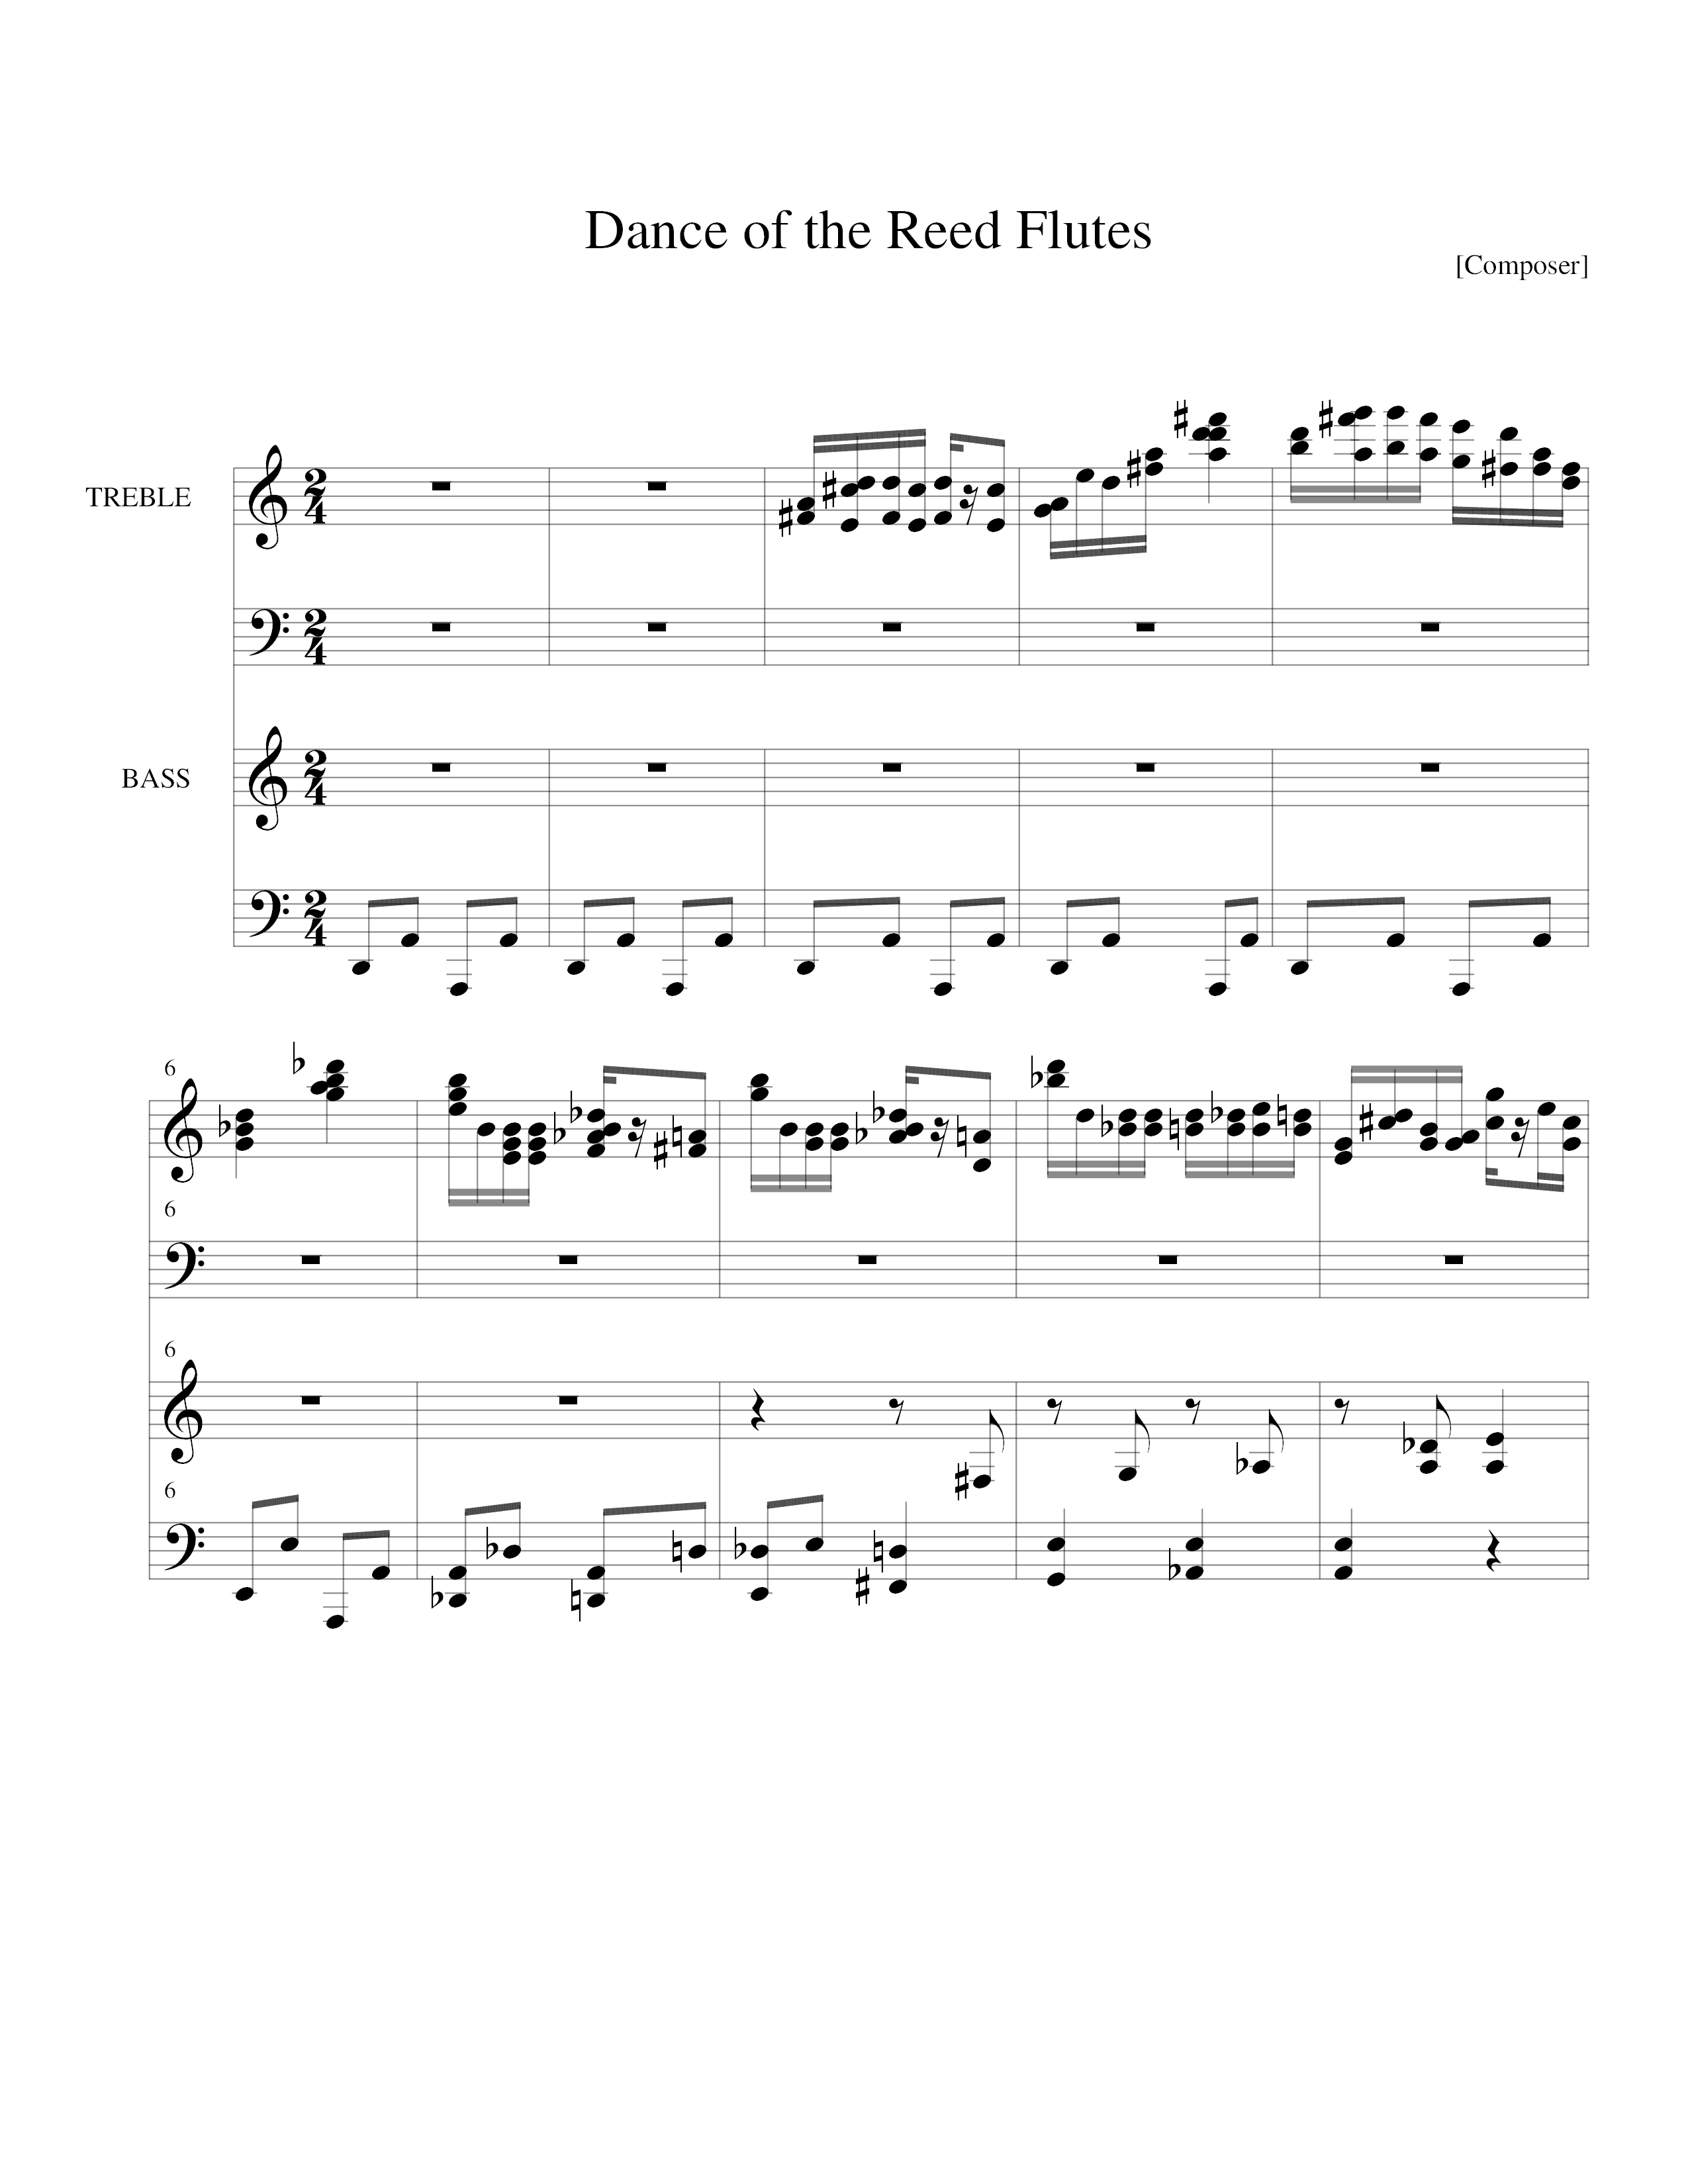 Dance of the Reed Flutes Score